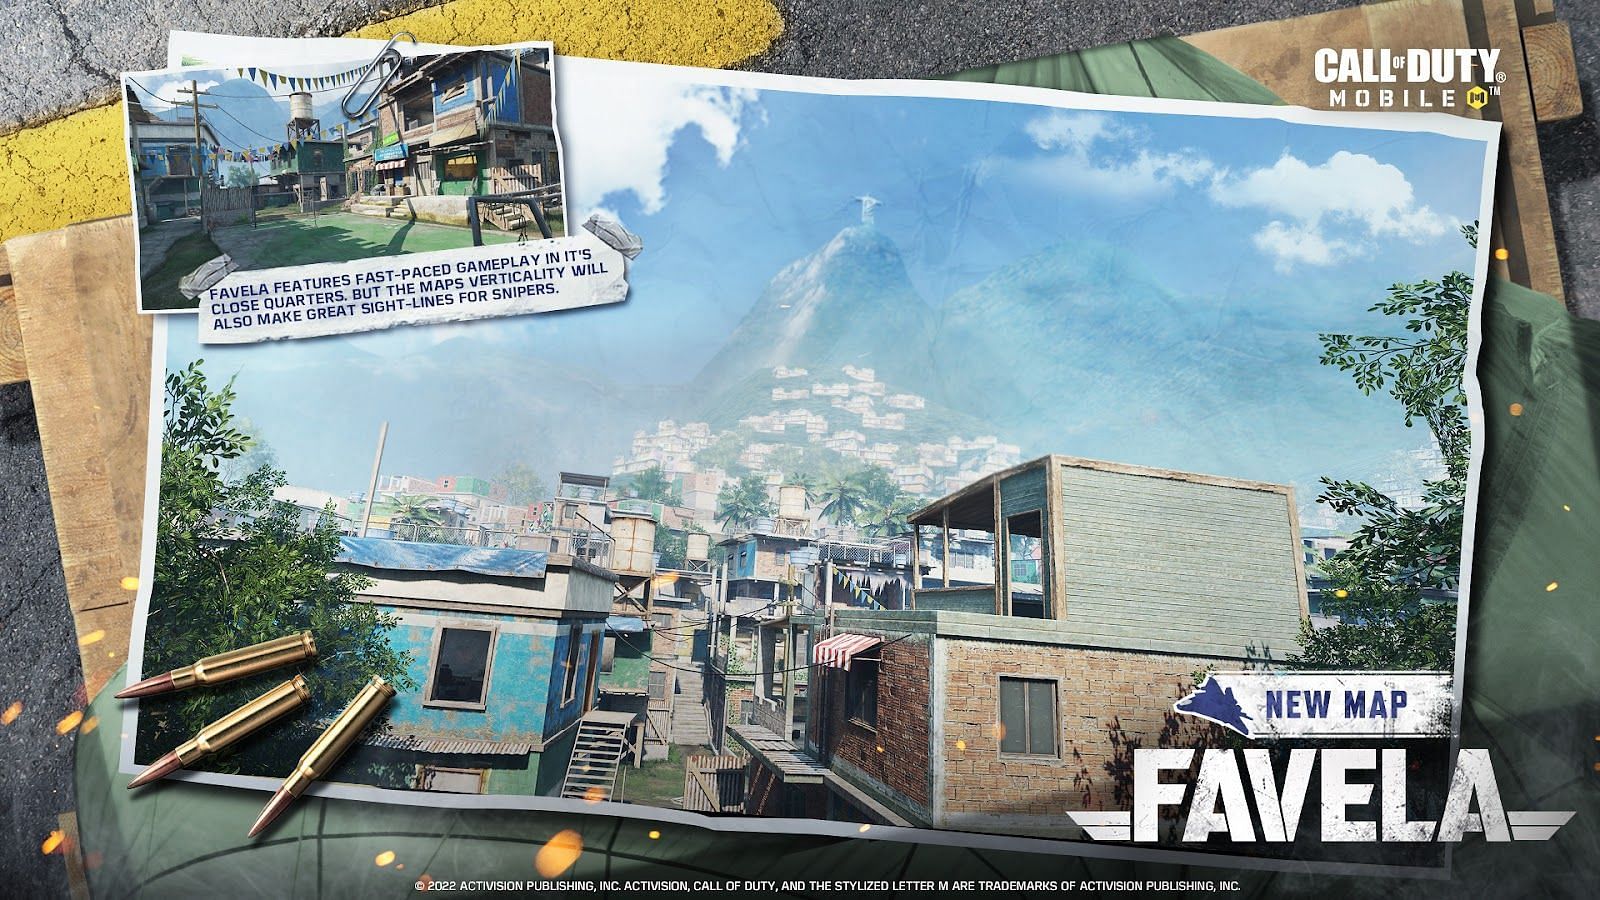 New map, Favel, is set in the slums of Rio